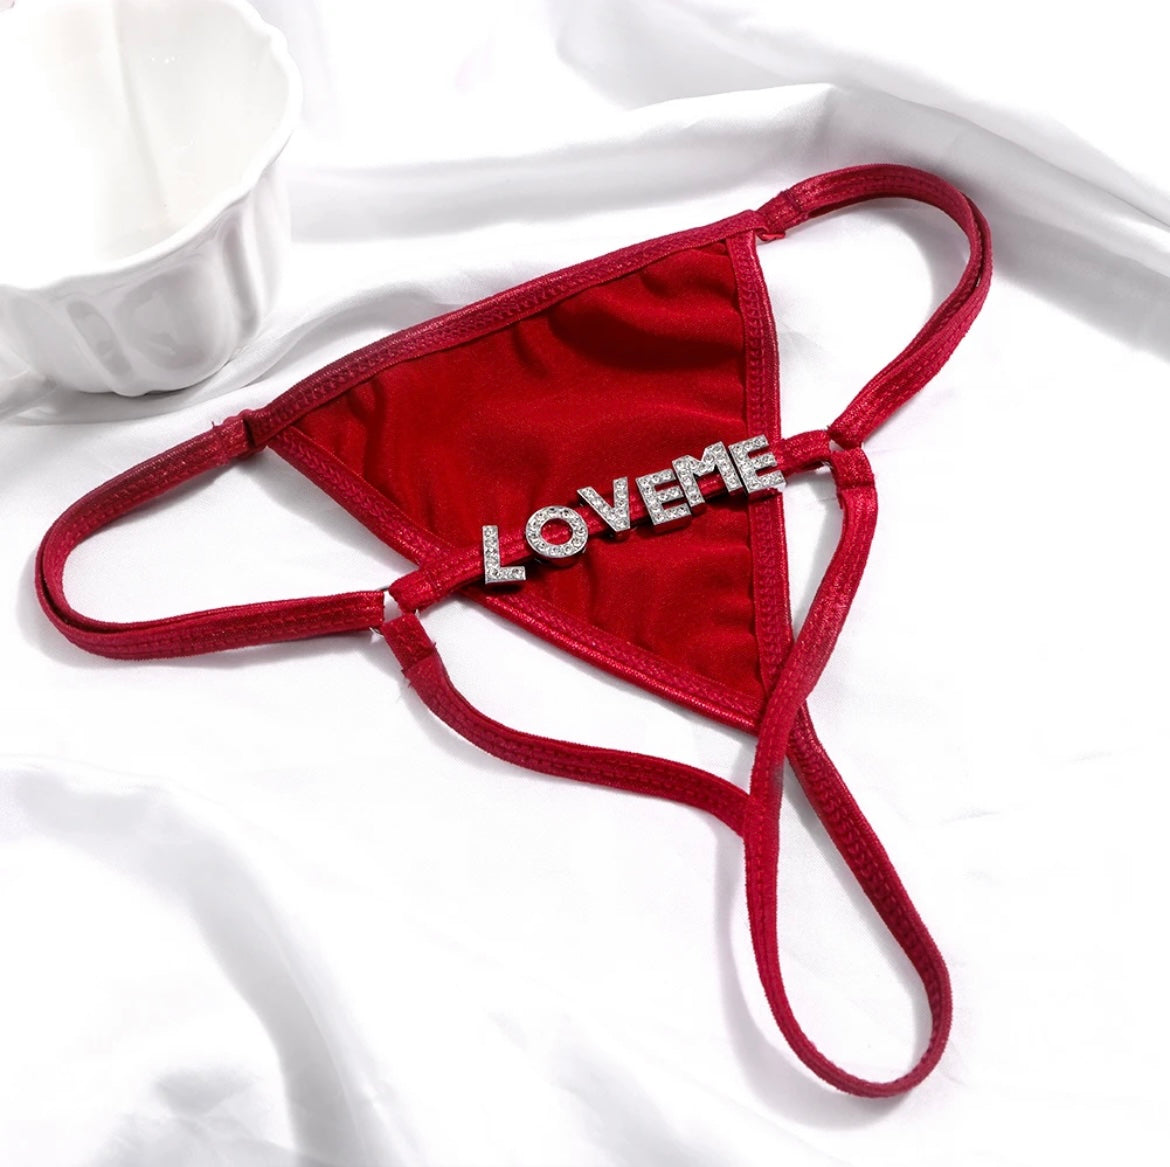 Tryi personalized thong - ADJUSTABLE